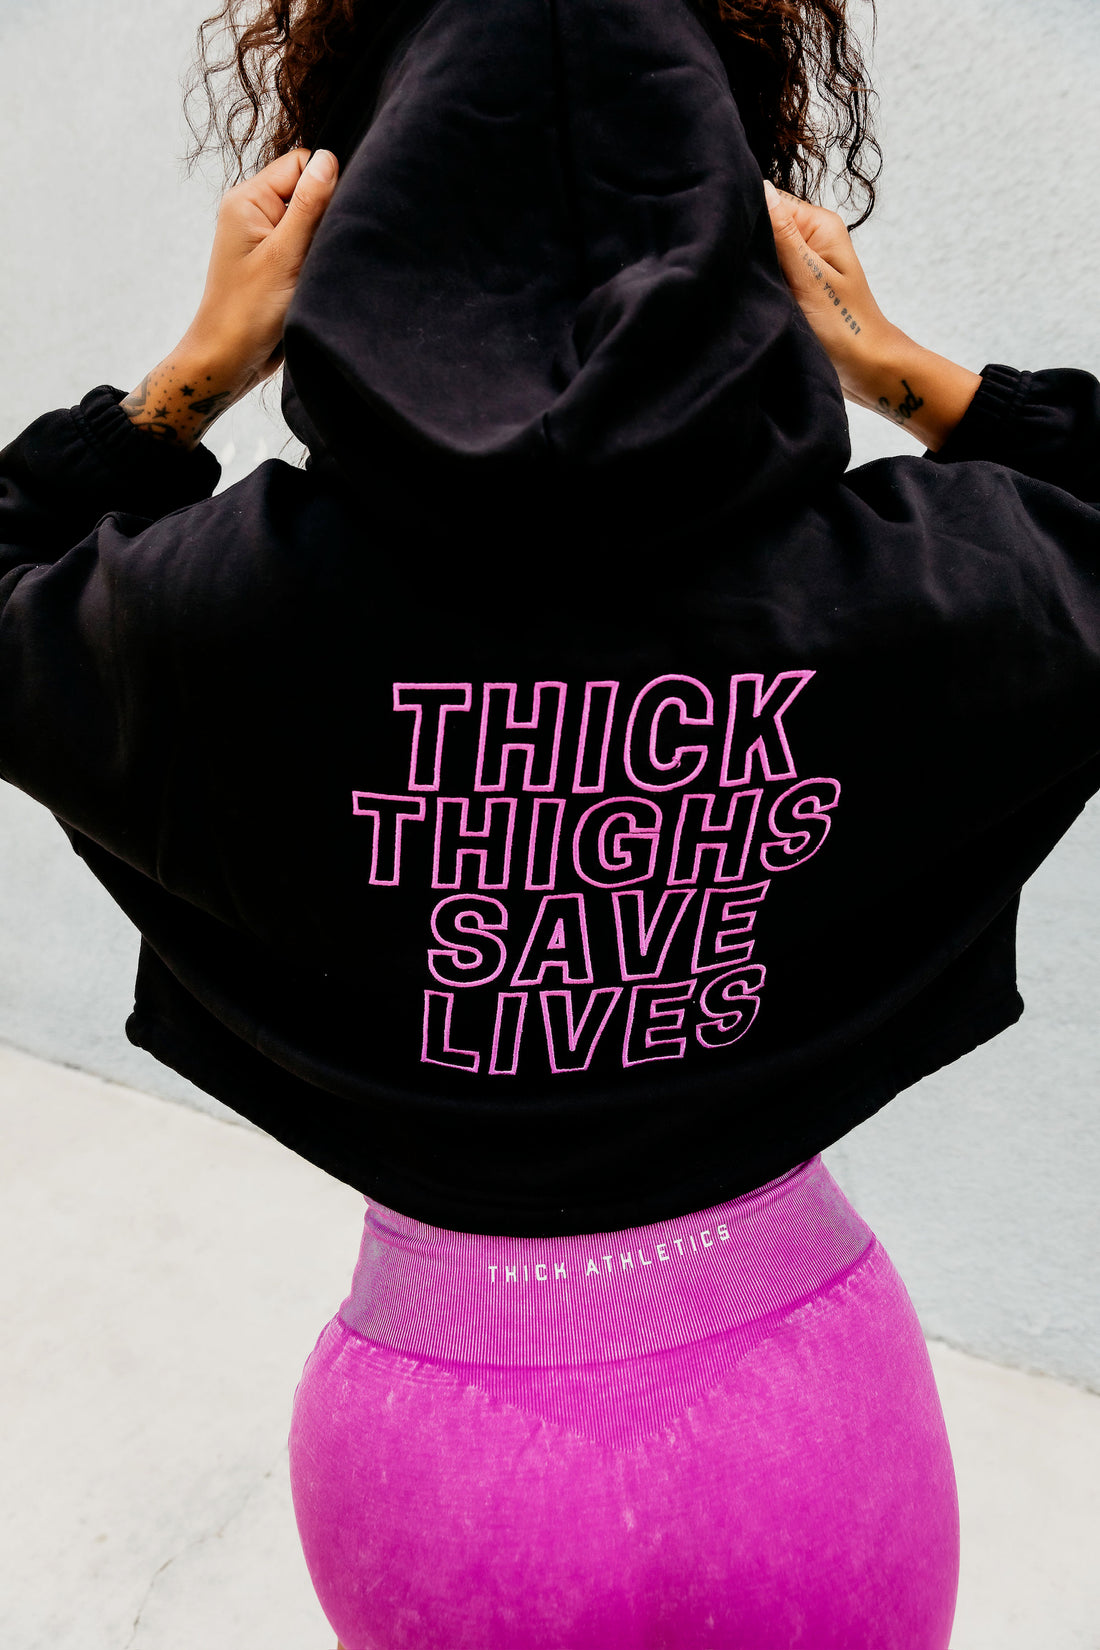 Black/Royal Purple THICK THIGHS SAVE LIVES Embroidered Crop Hoodie 2.0